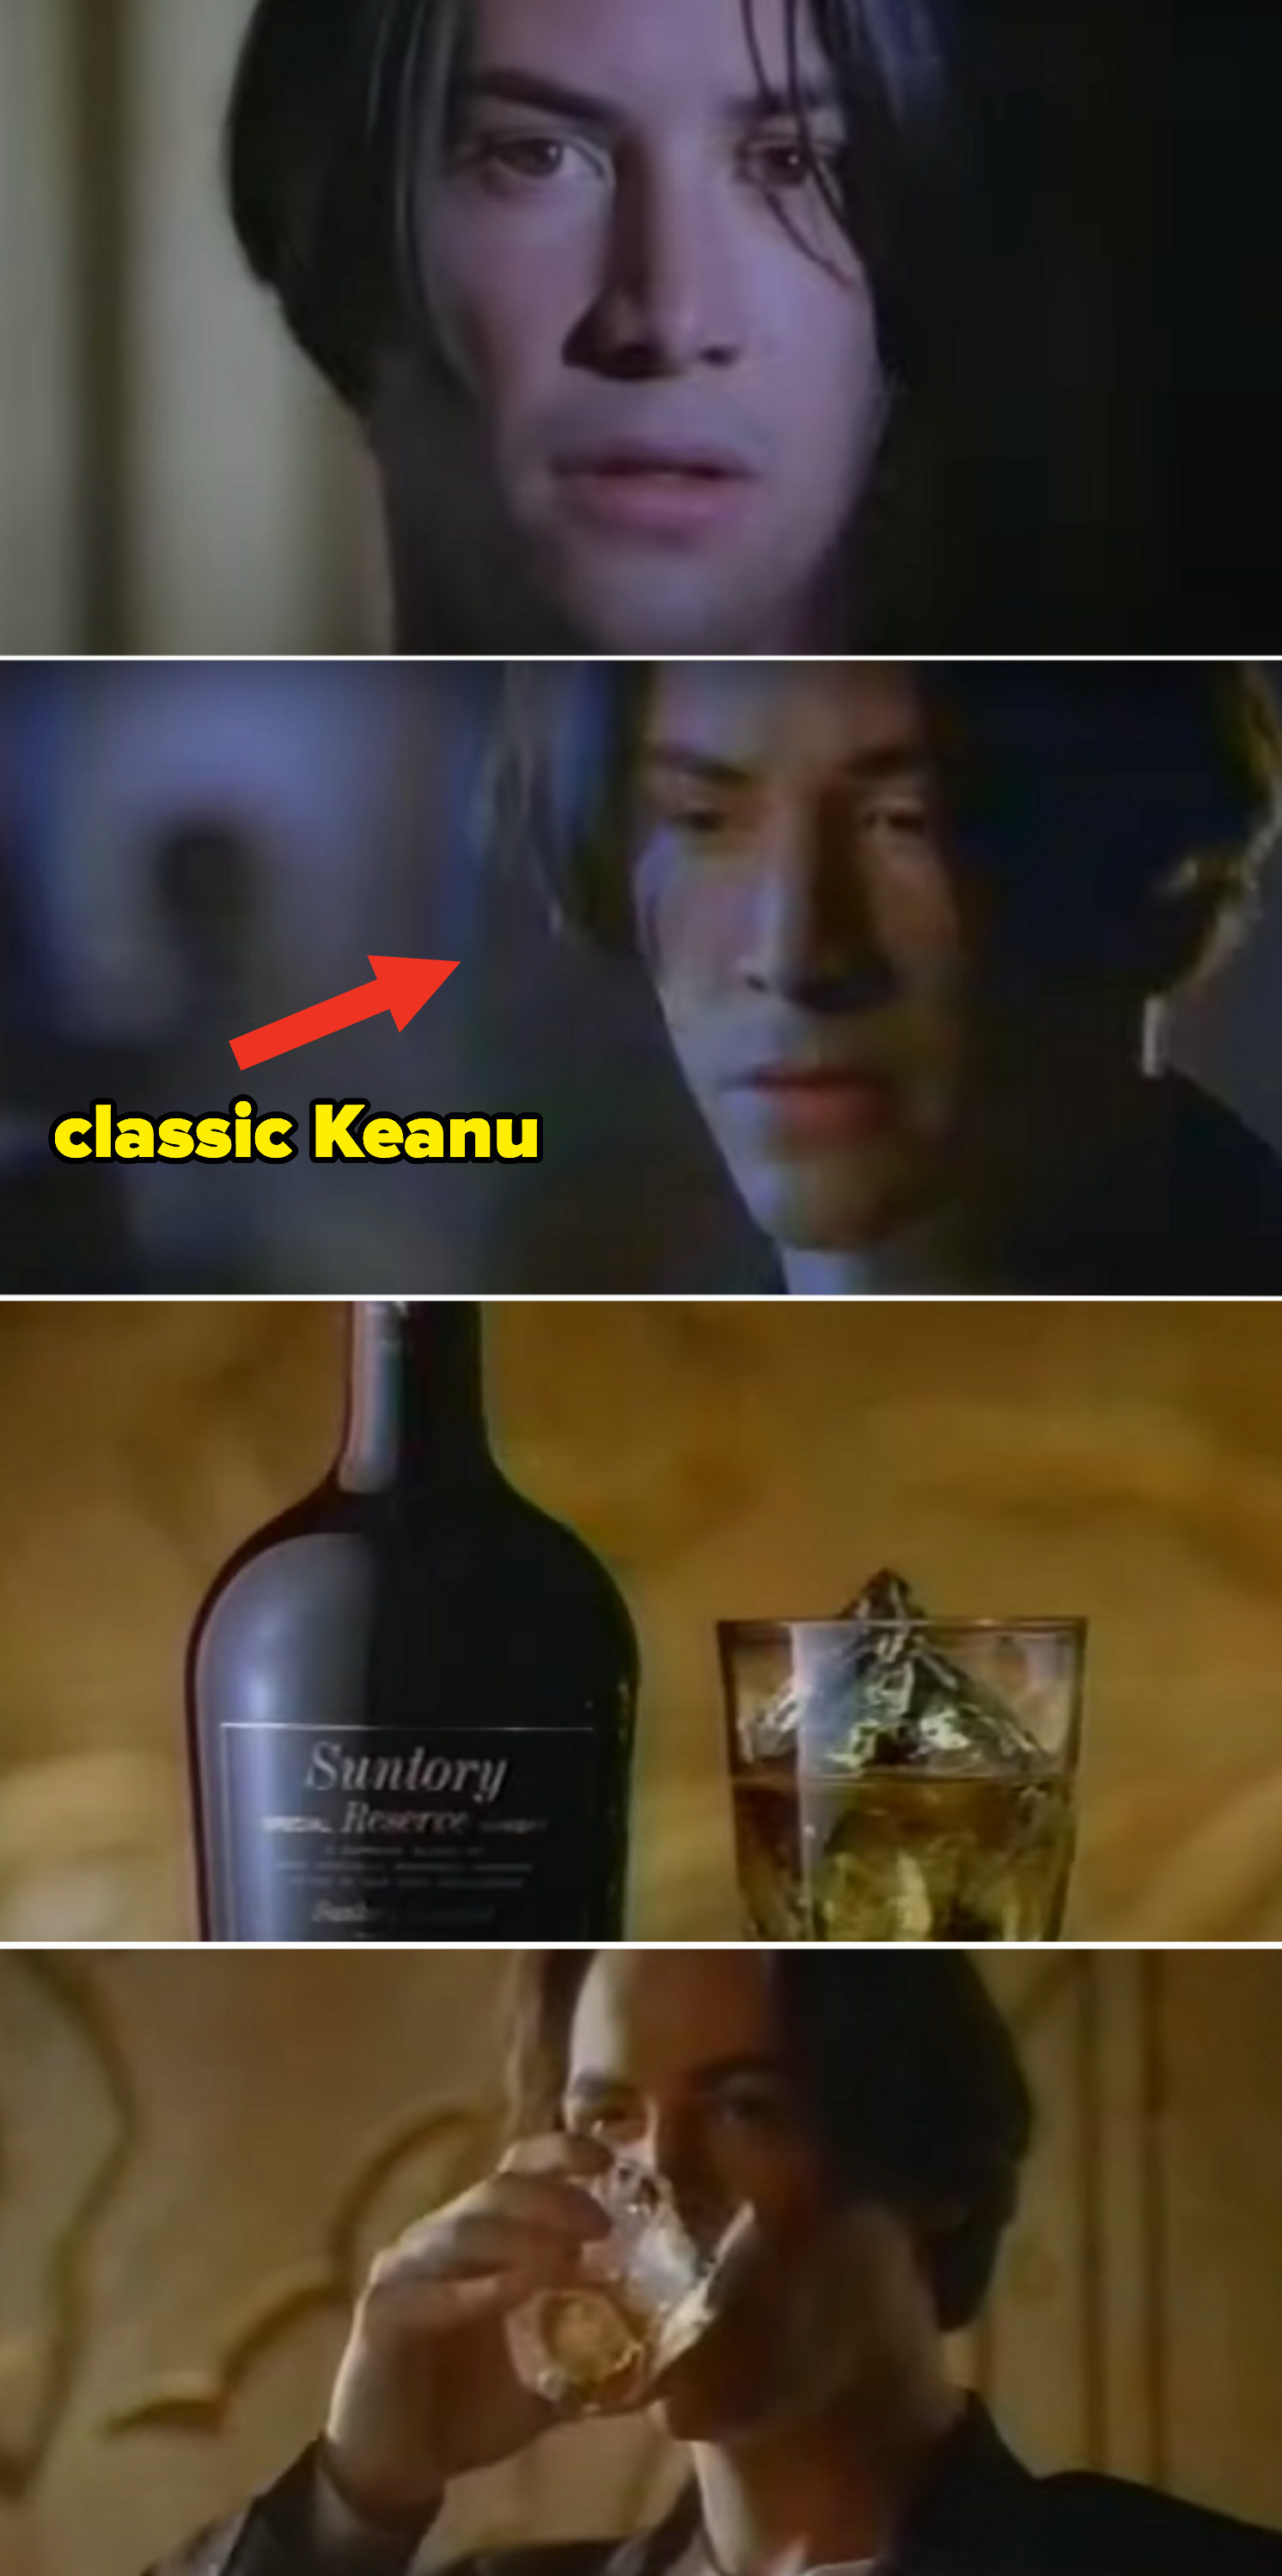 keanu in the commercial